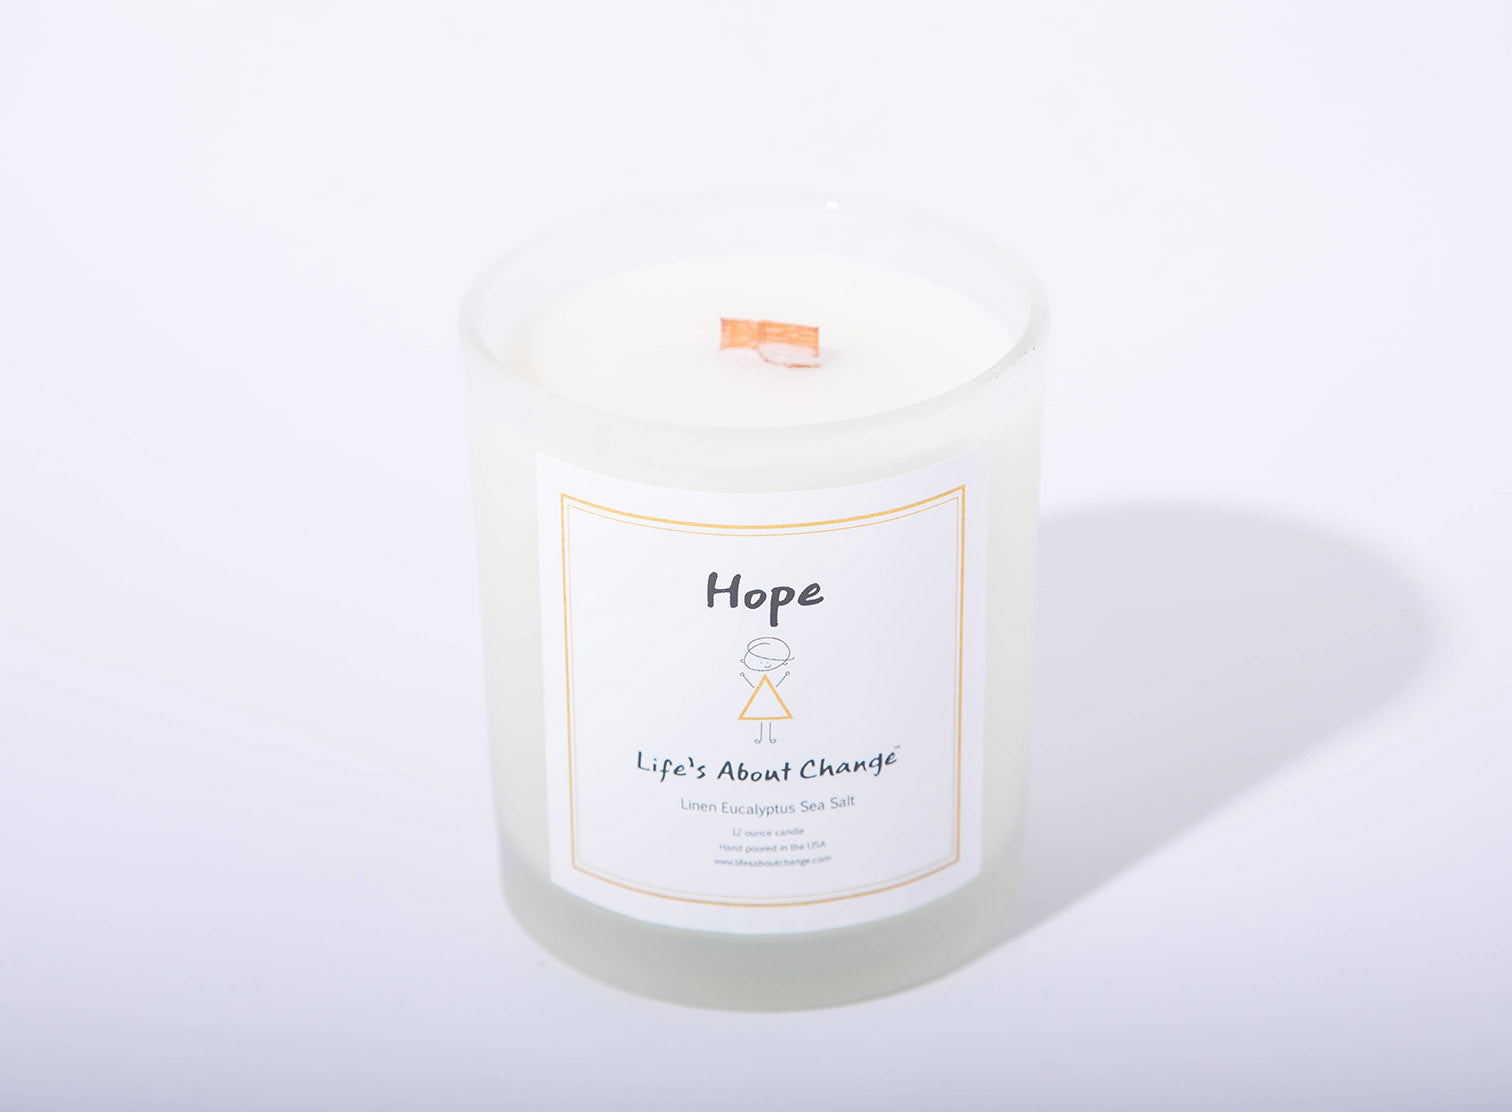 Hope Linen Eucalyptus Sea Salt Candles from Life's About Change Delta Collection